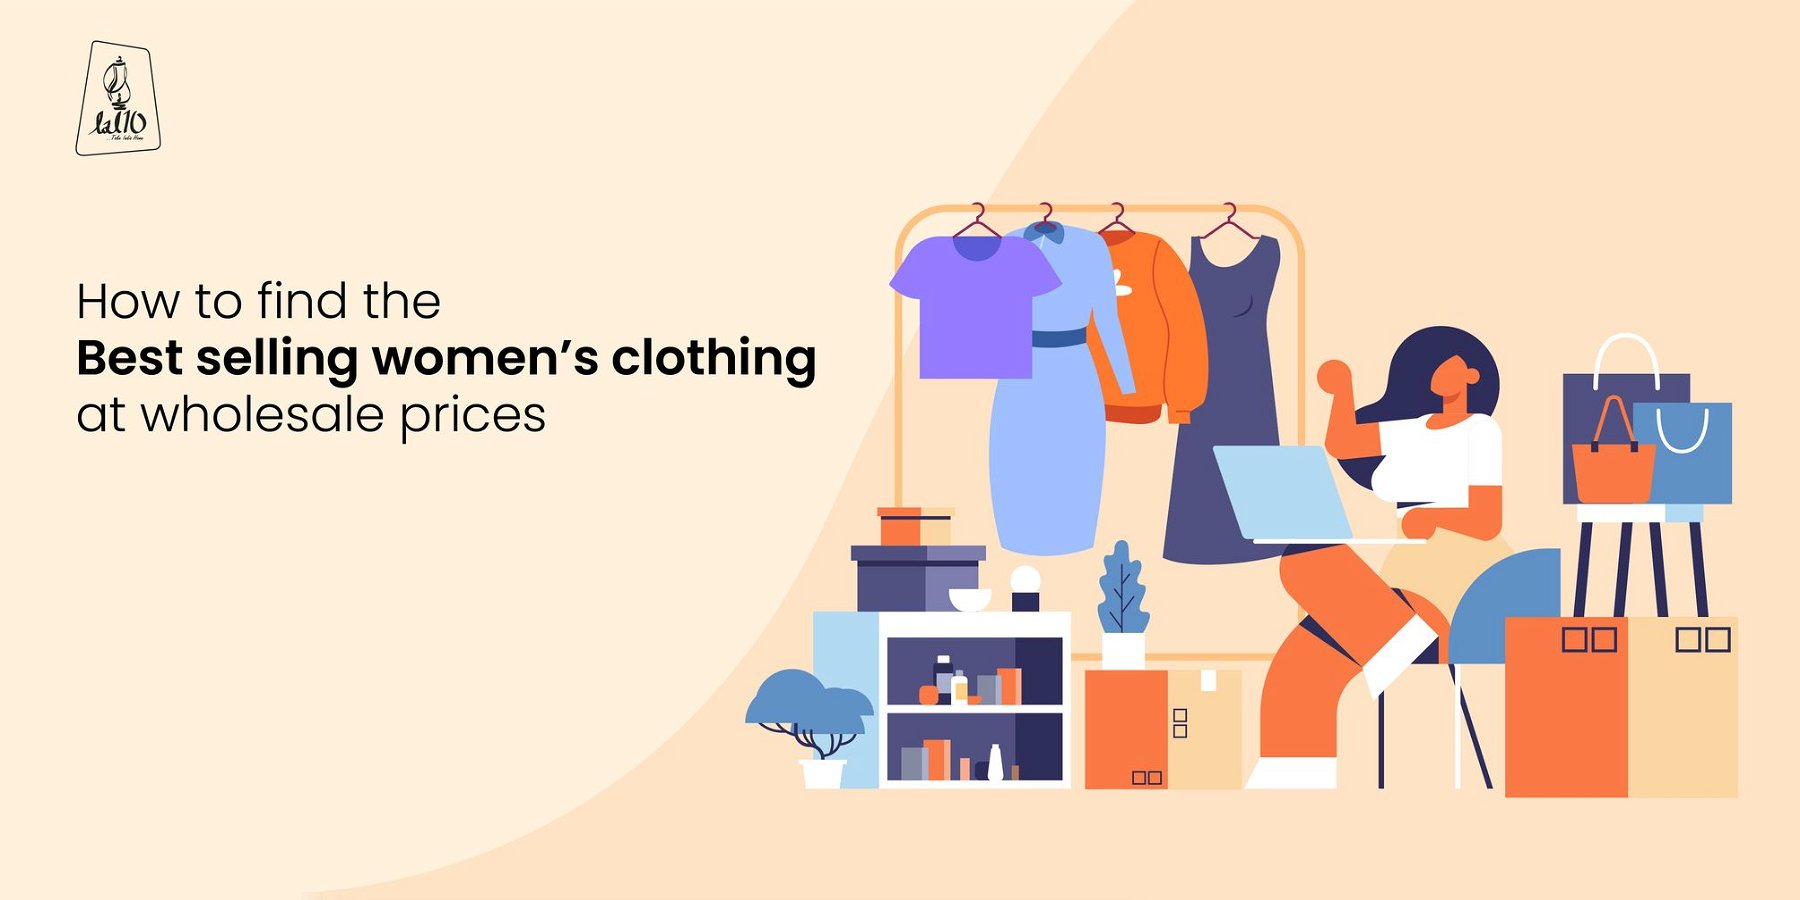 How to find the best selling women’s clothing at wholesale prices